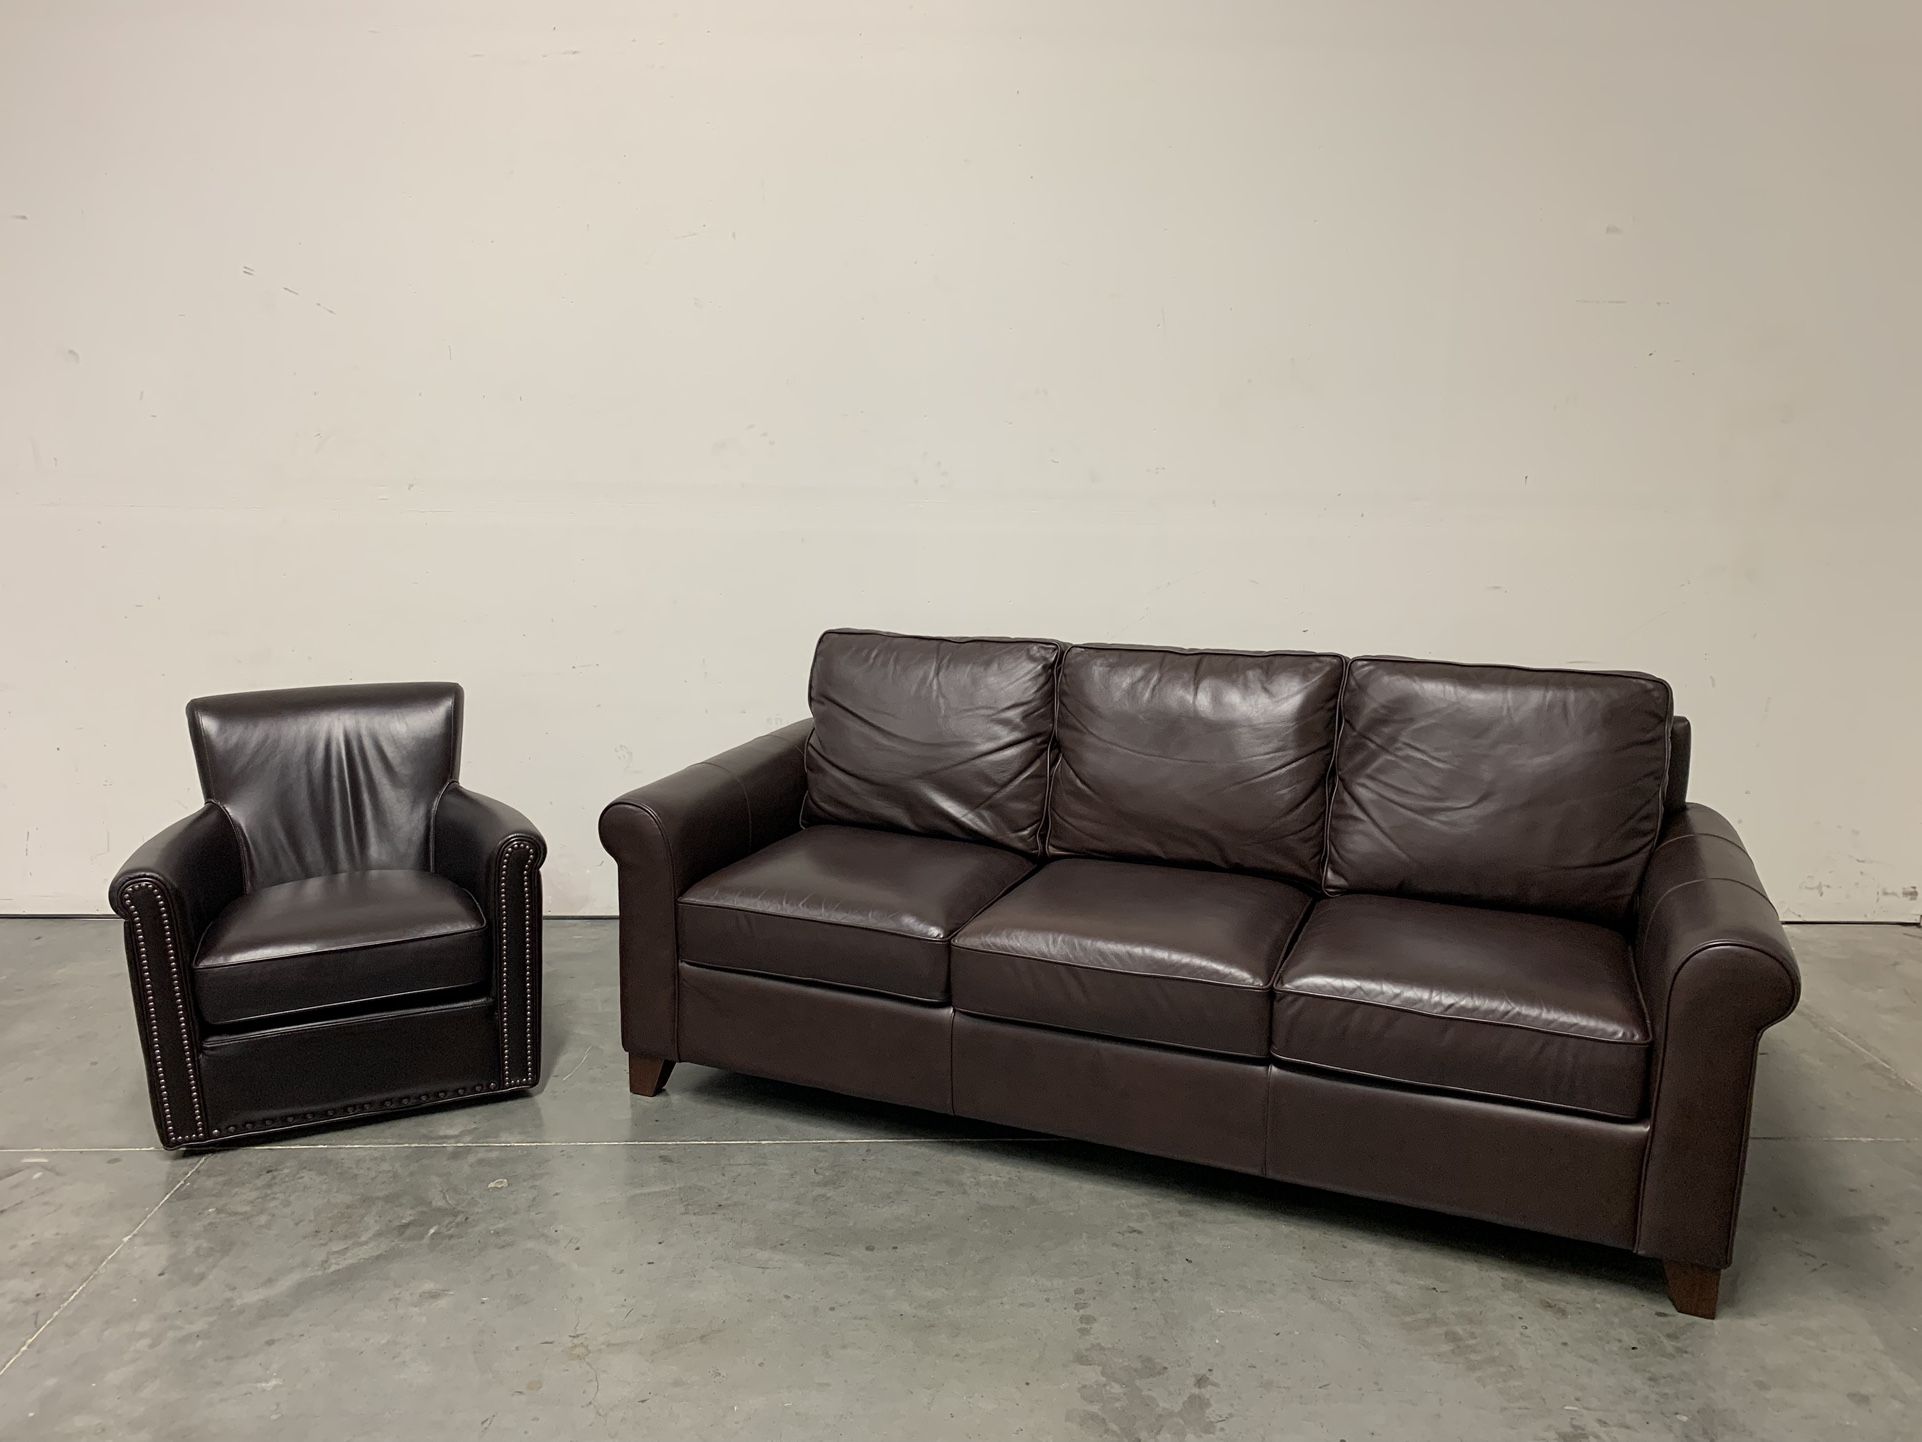 Pottery Barn, Cameron Leather Sofa and Irving Leather Swivel Chair